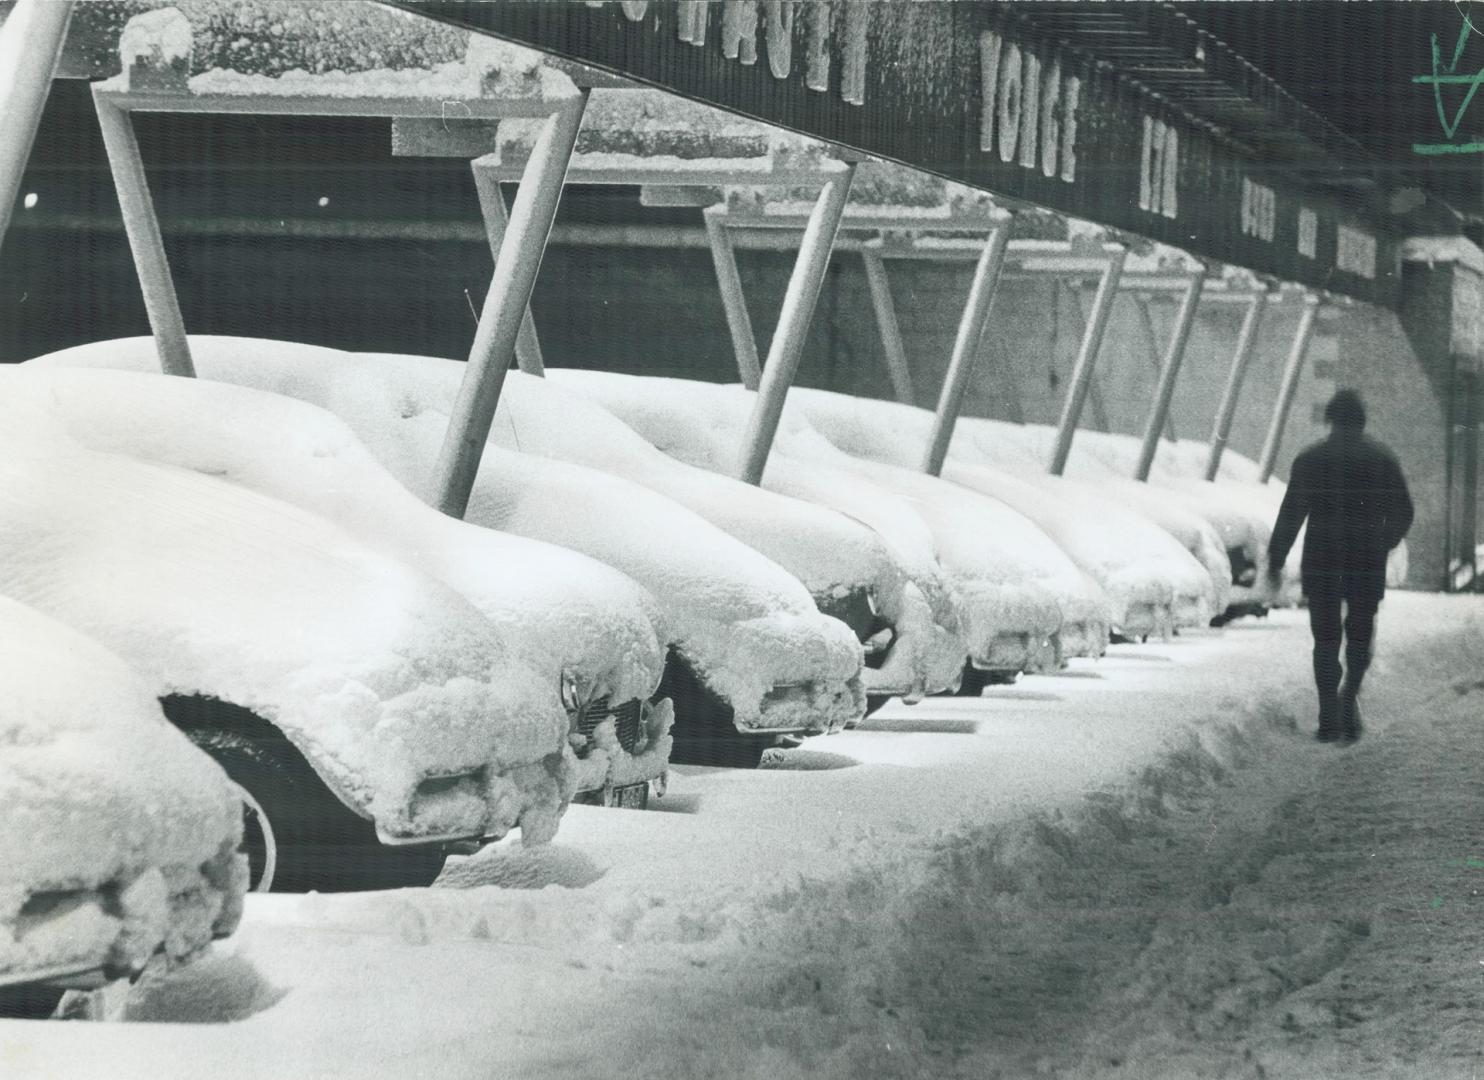 Mantle of snow blanketing these cars on a Yonge St